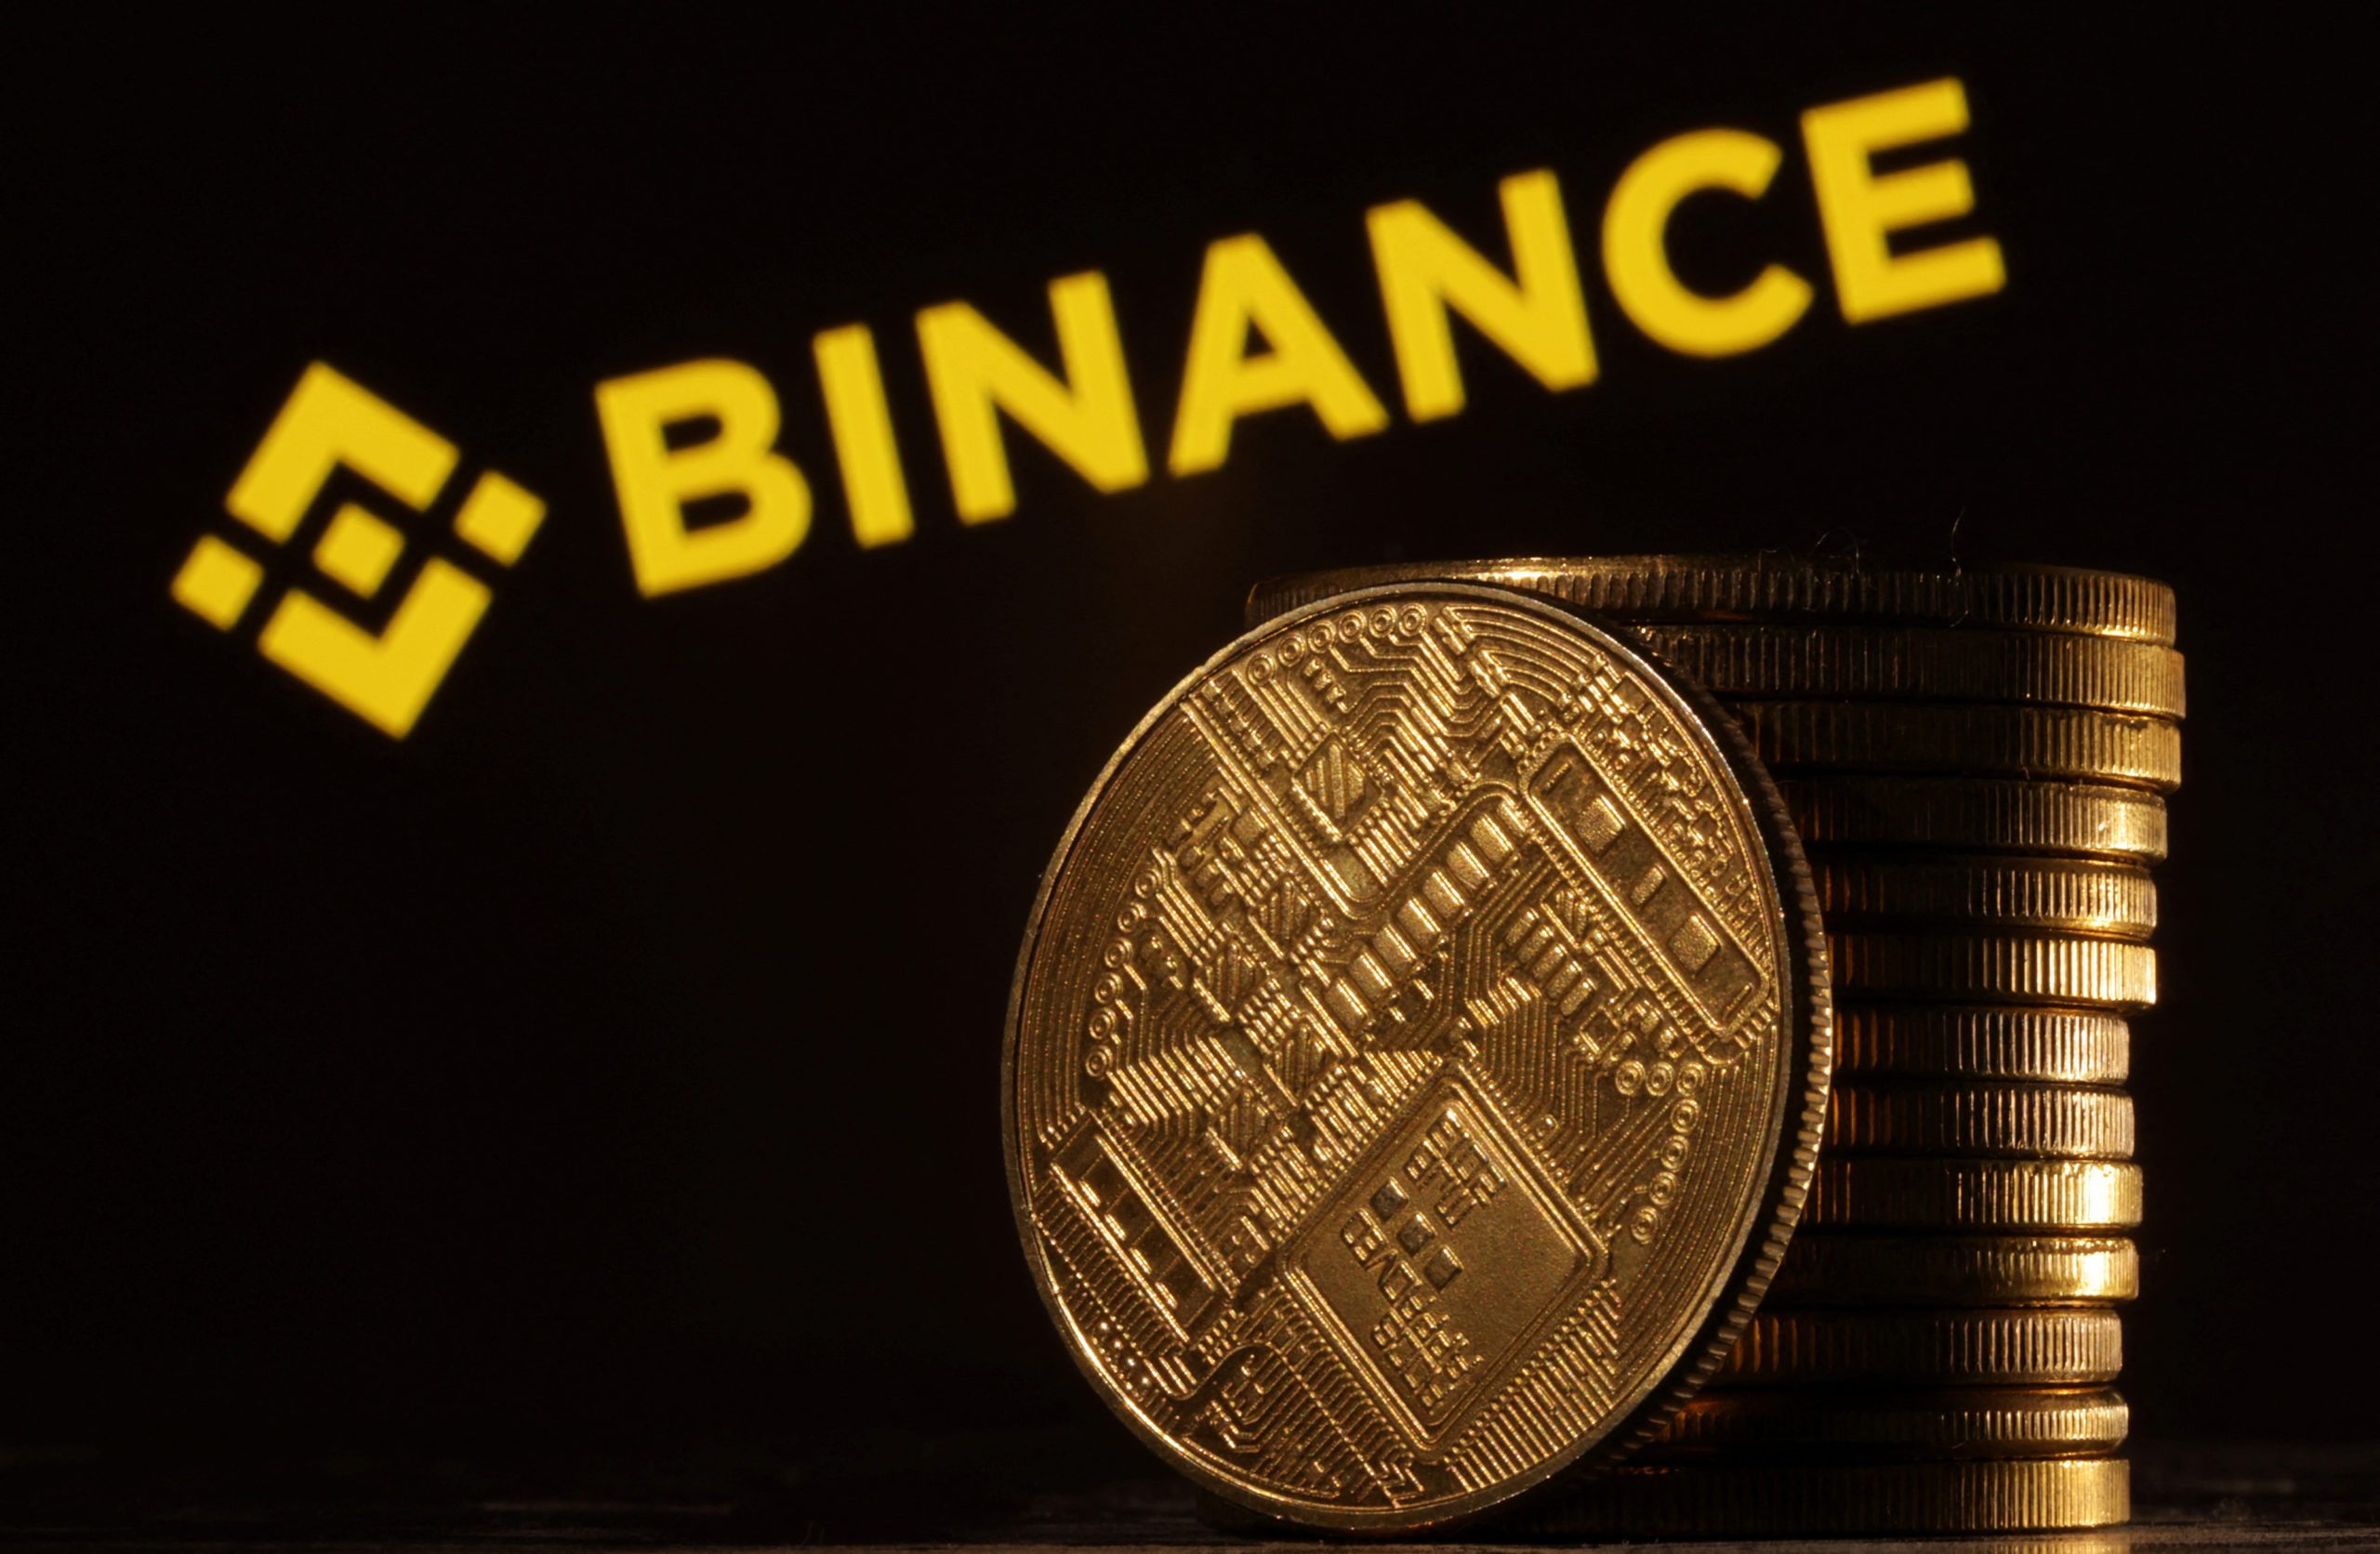 Binance and its US affiliate hit by net outflows of $790m in last 24 hours